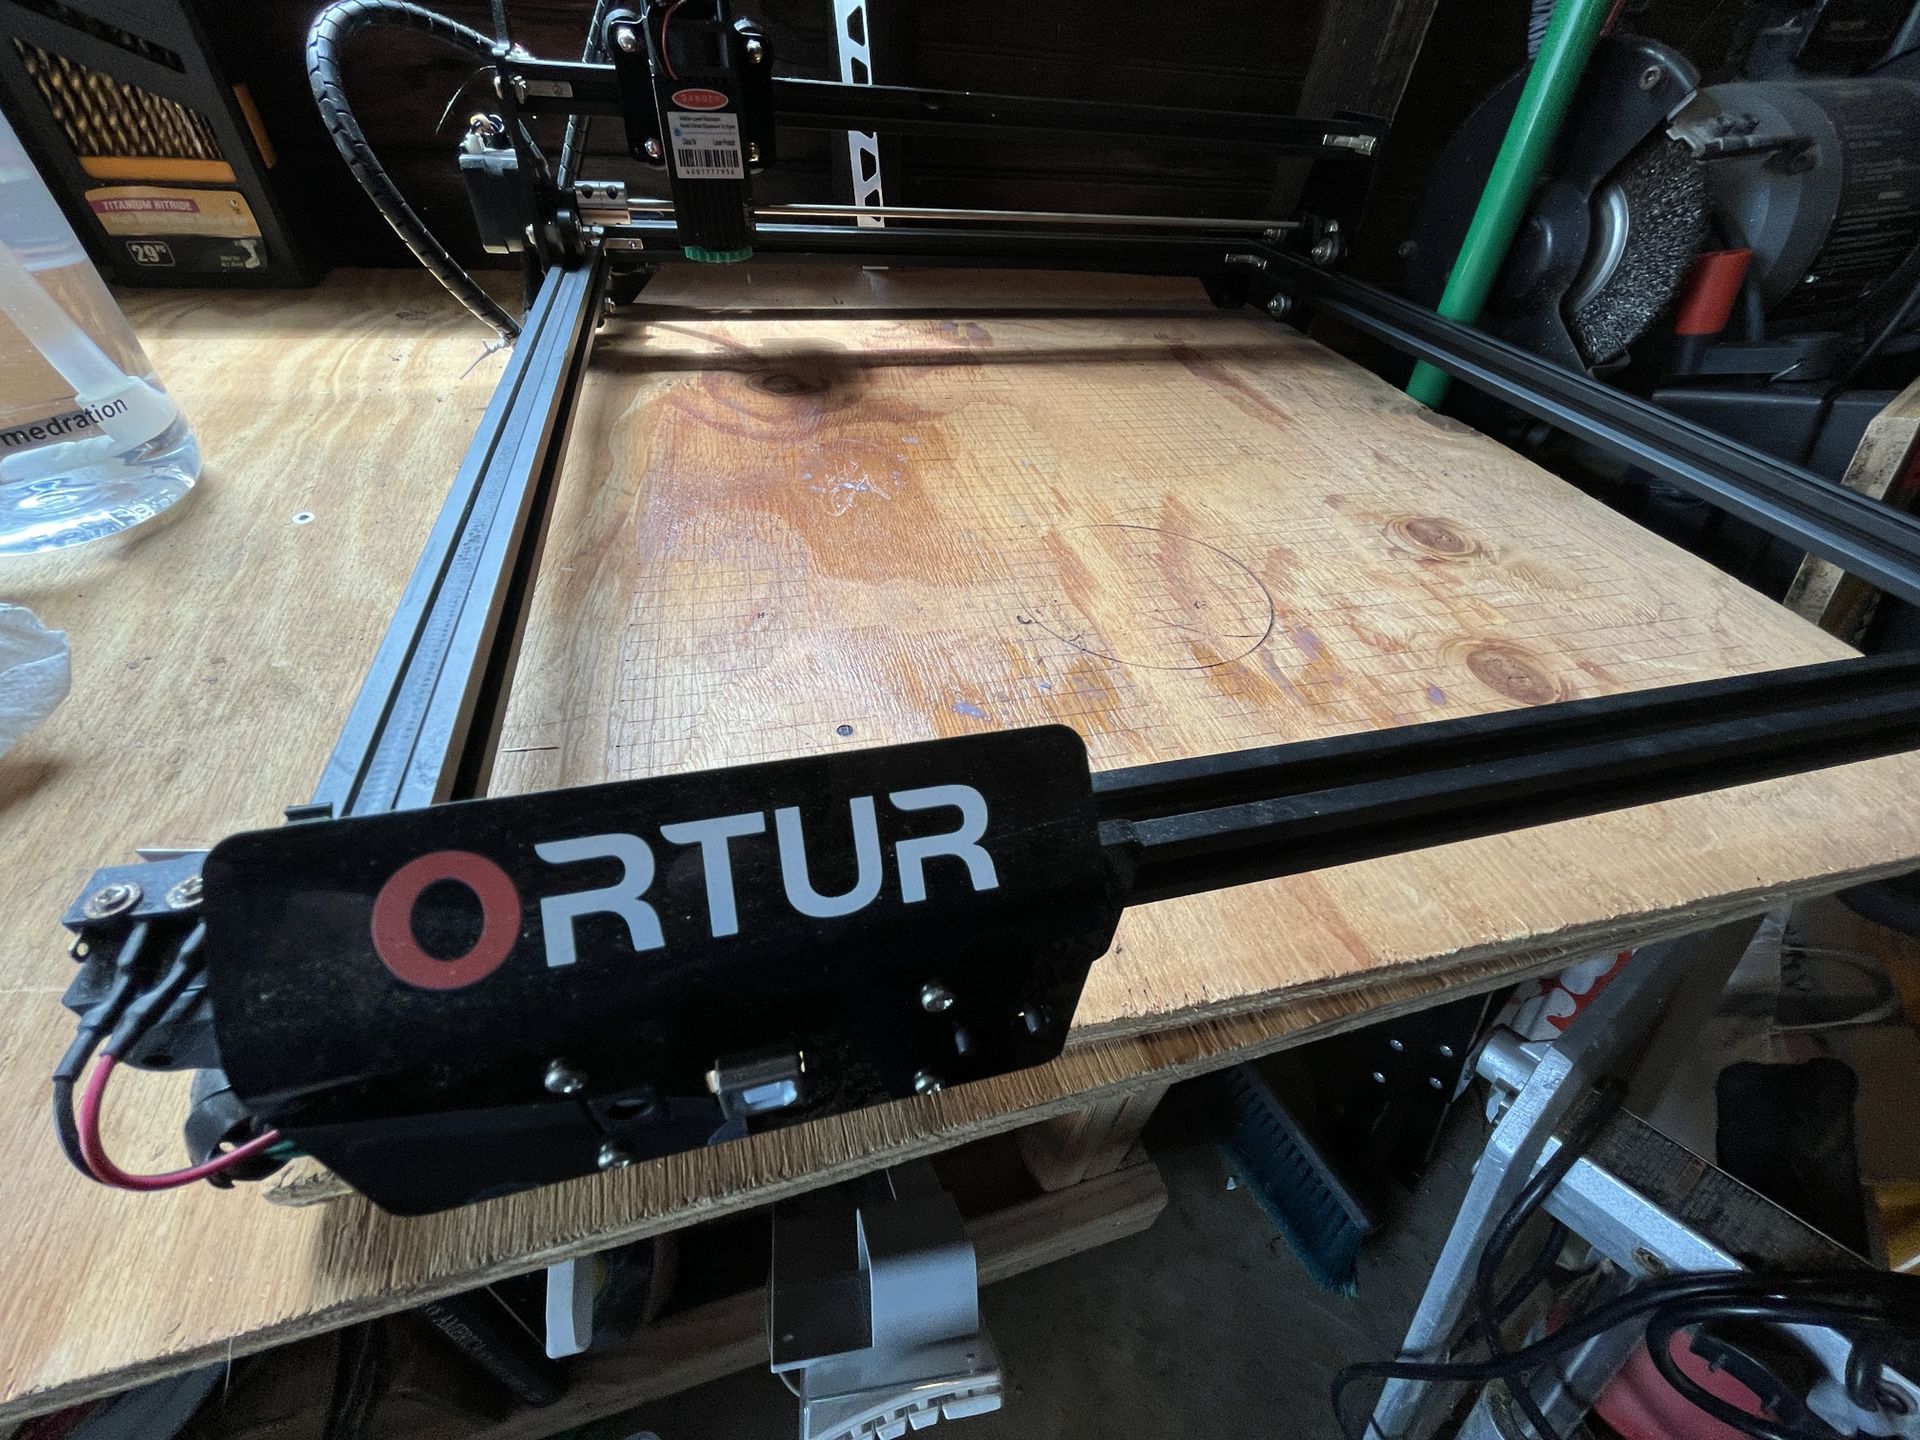 Ortur Laser master For Engraving And Wood Burning  - Works Perfectly 